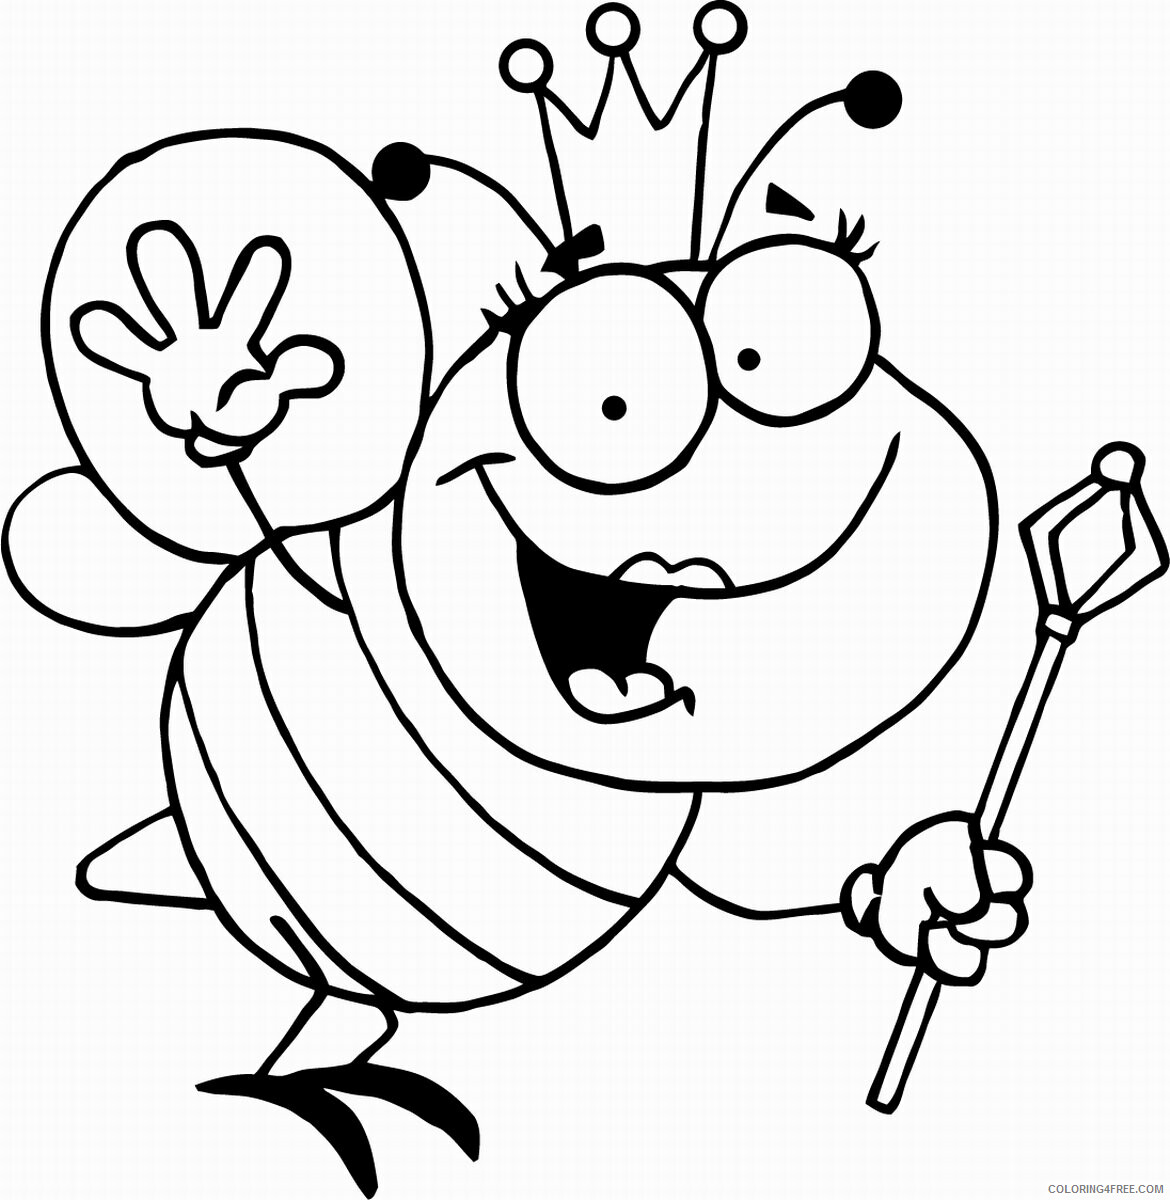 Bee Coloring Pages Animal Printable Sheets bee_cl_19 2021 0369 Coloring4free